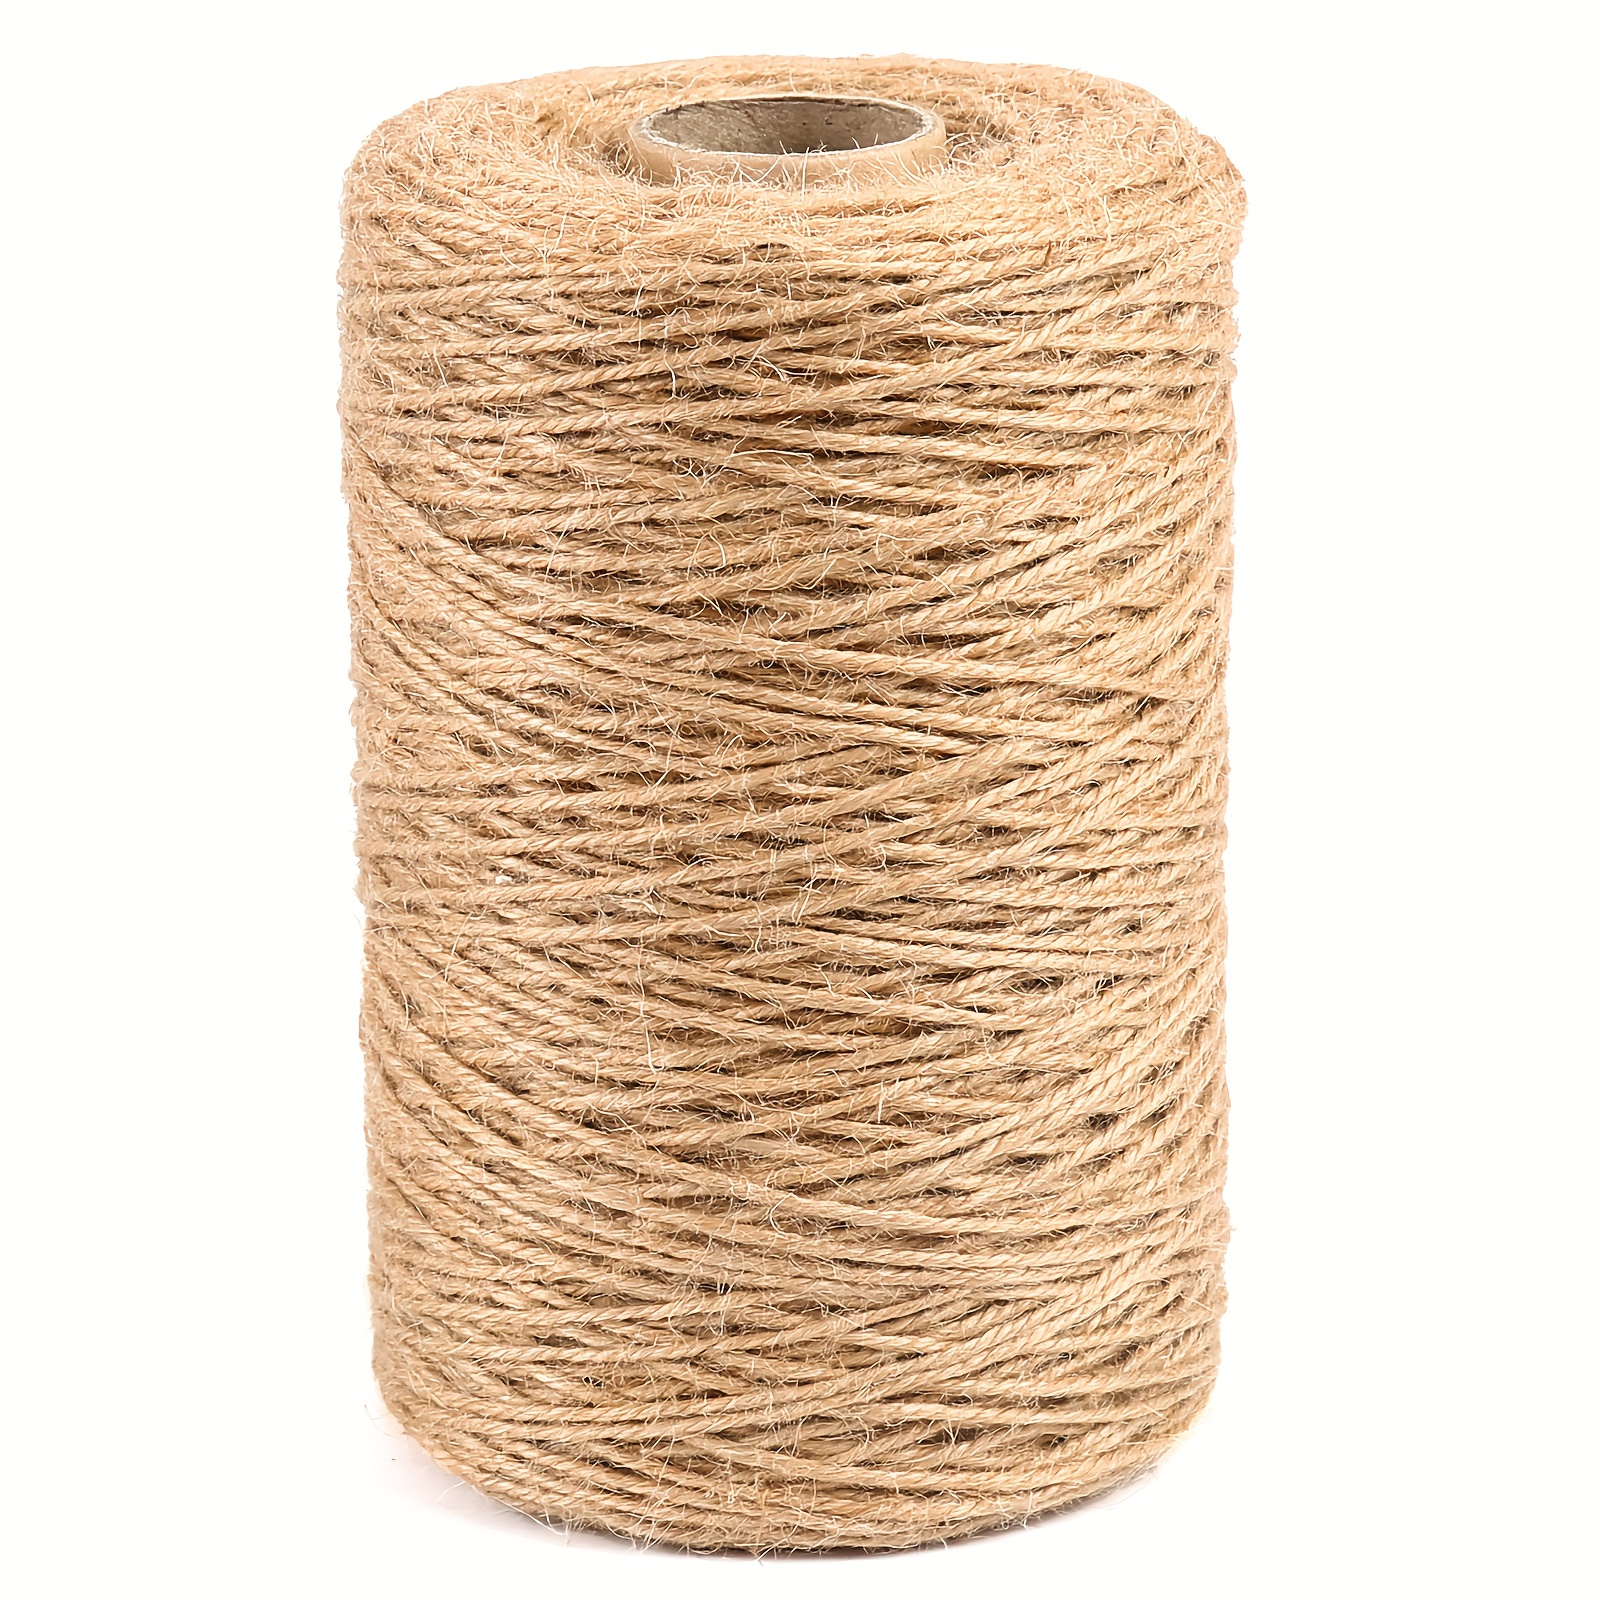 6Mm Jute Rope, 164 Feet Heavy Duty and Thick Twine Rope for Gardening,  Crafting